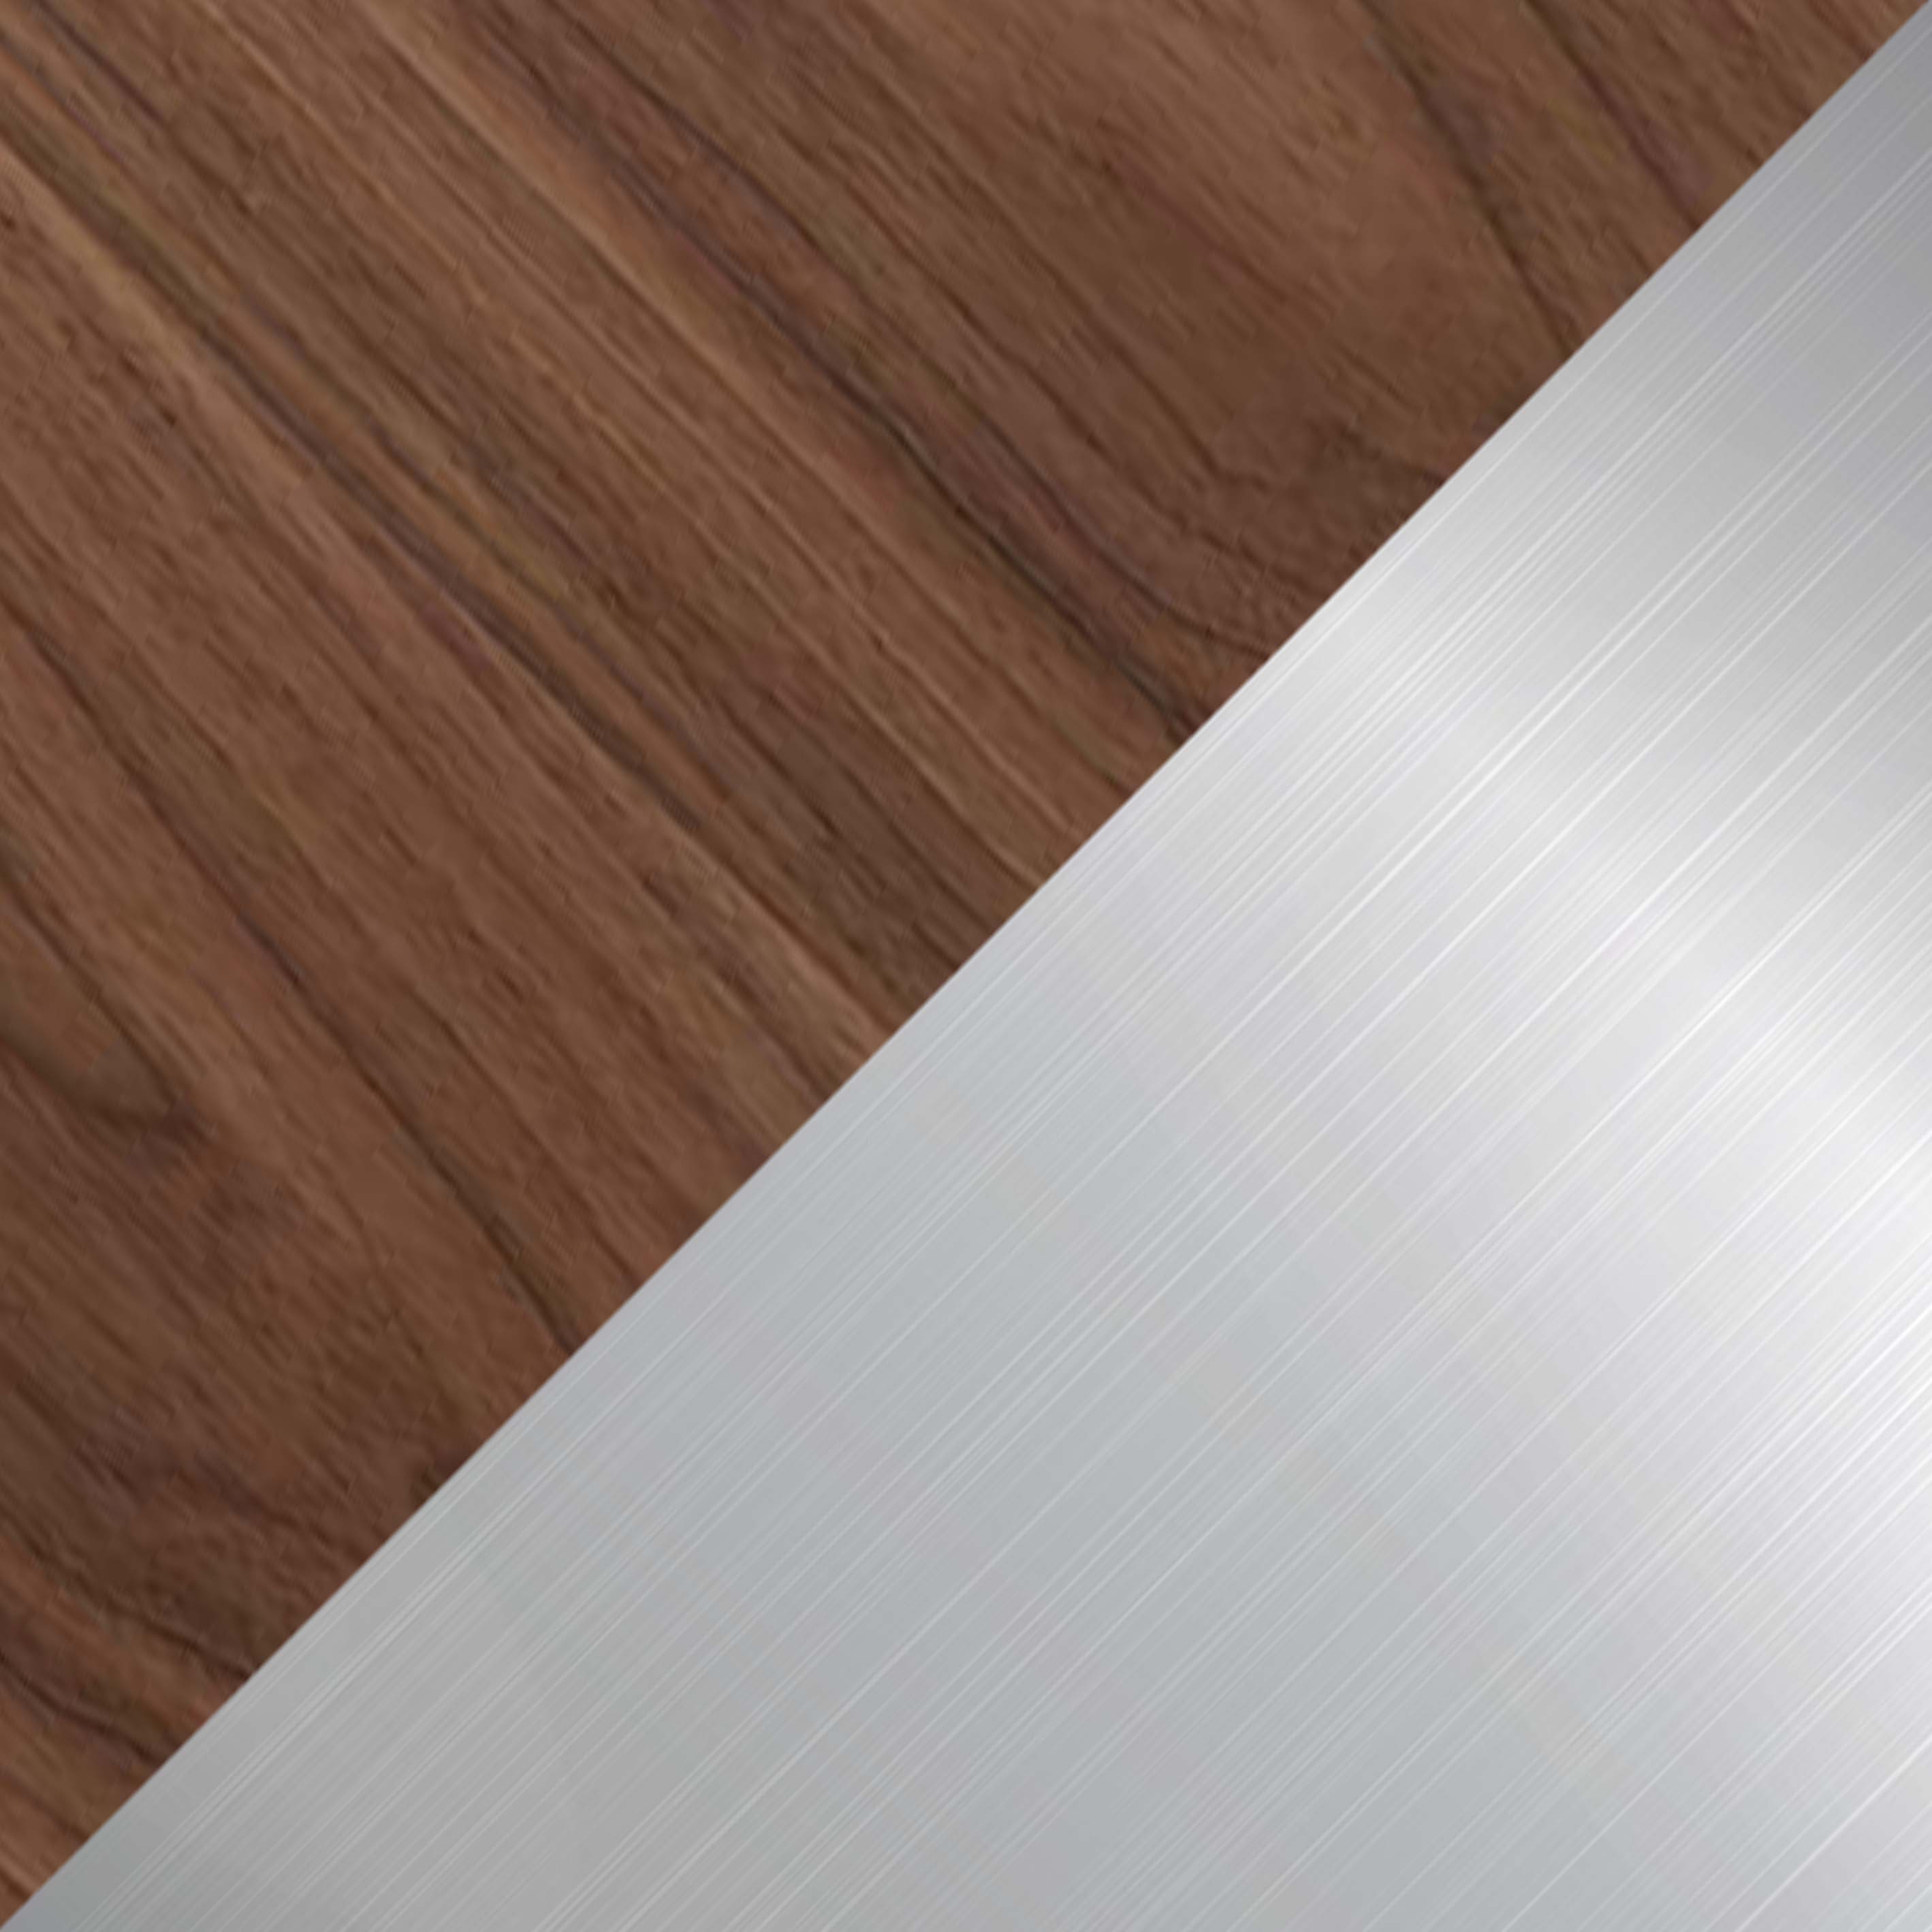 Chrome/Lacquered Walnut